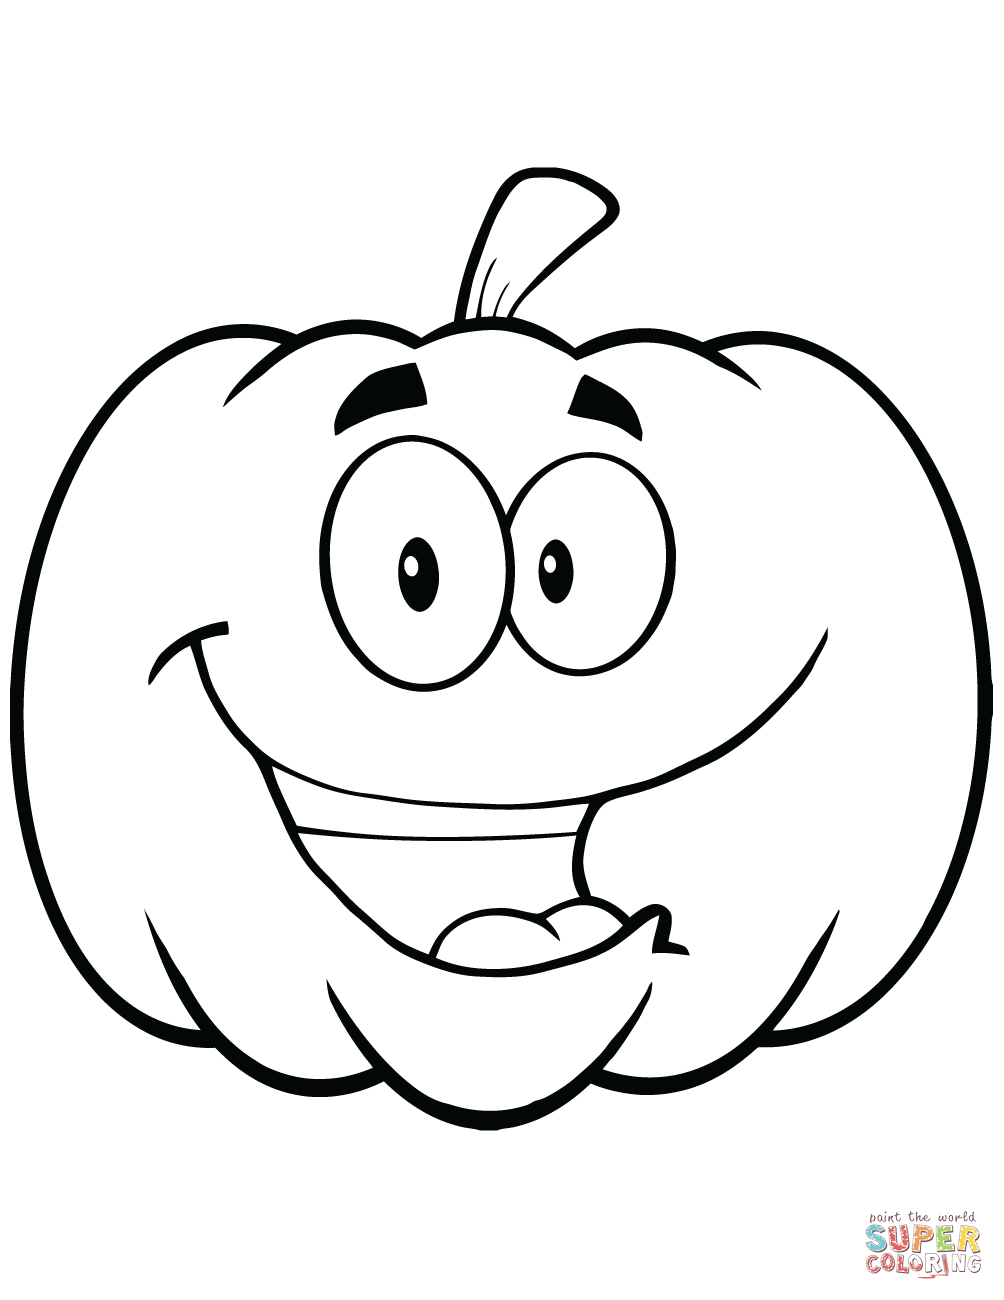 Cartoon halloween pumpkin coloring page free printable coloring pages